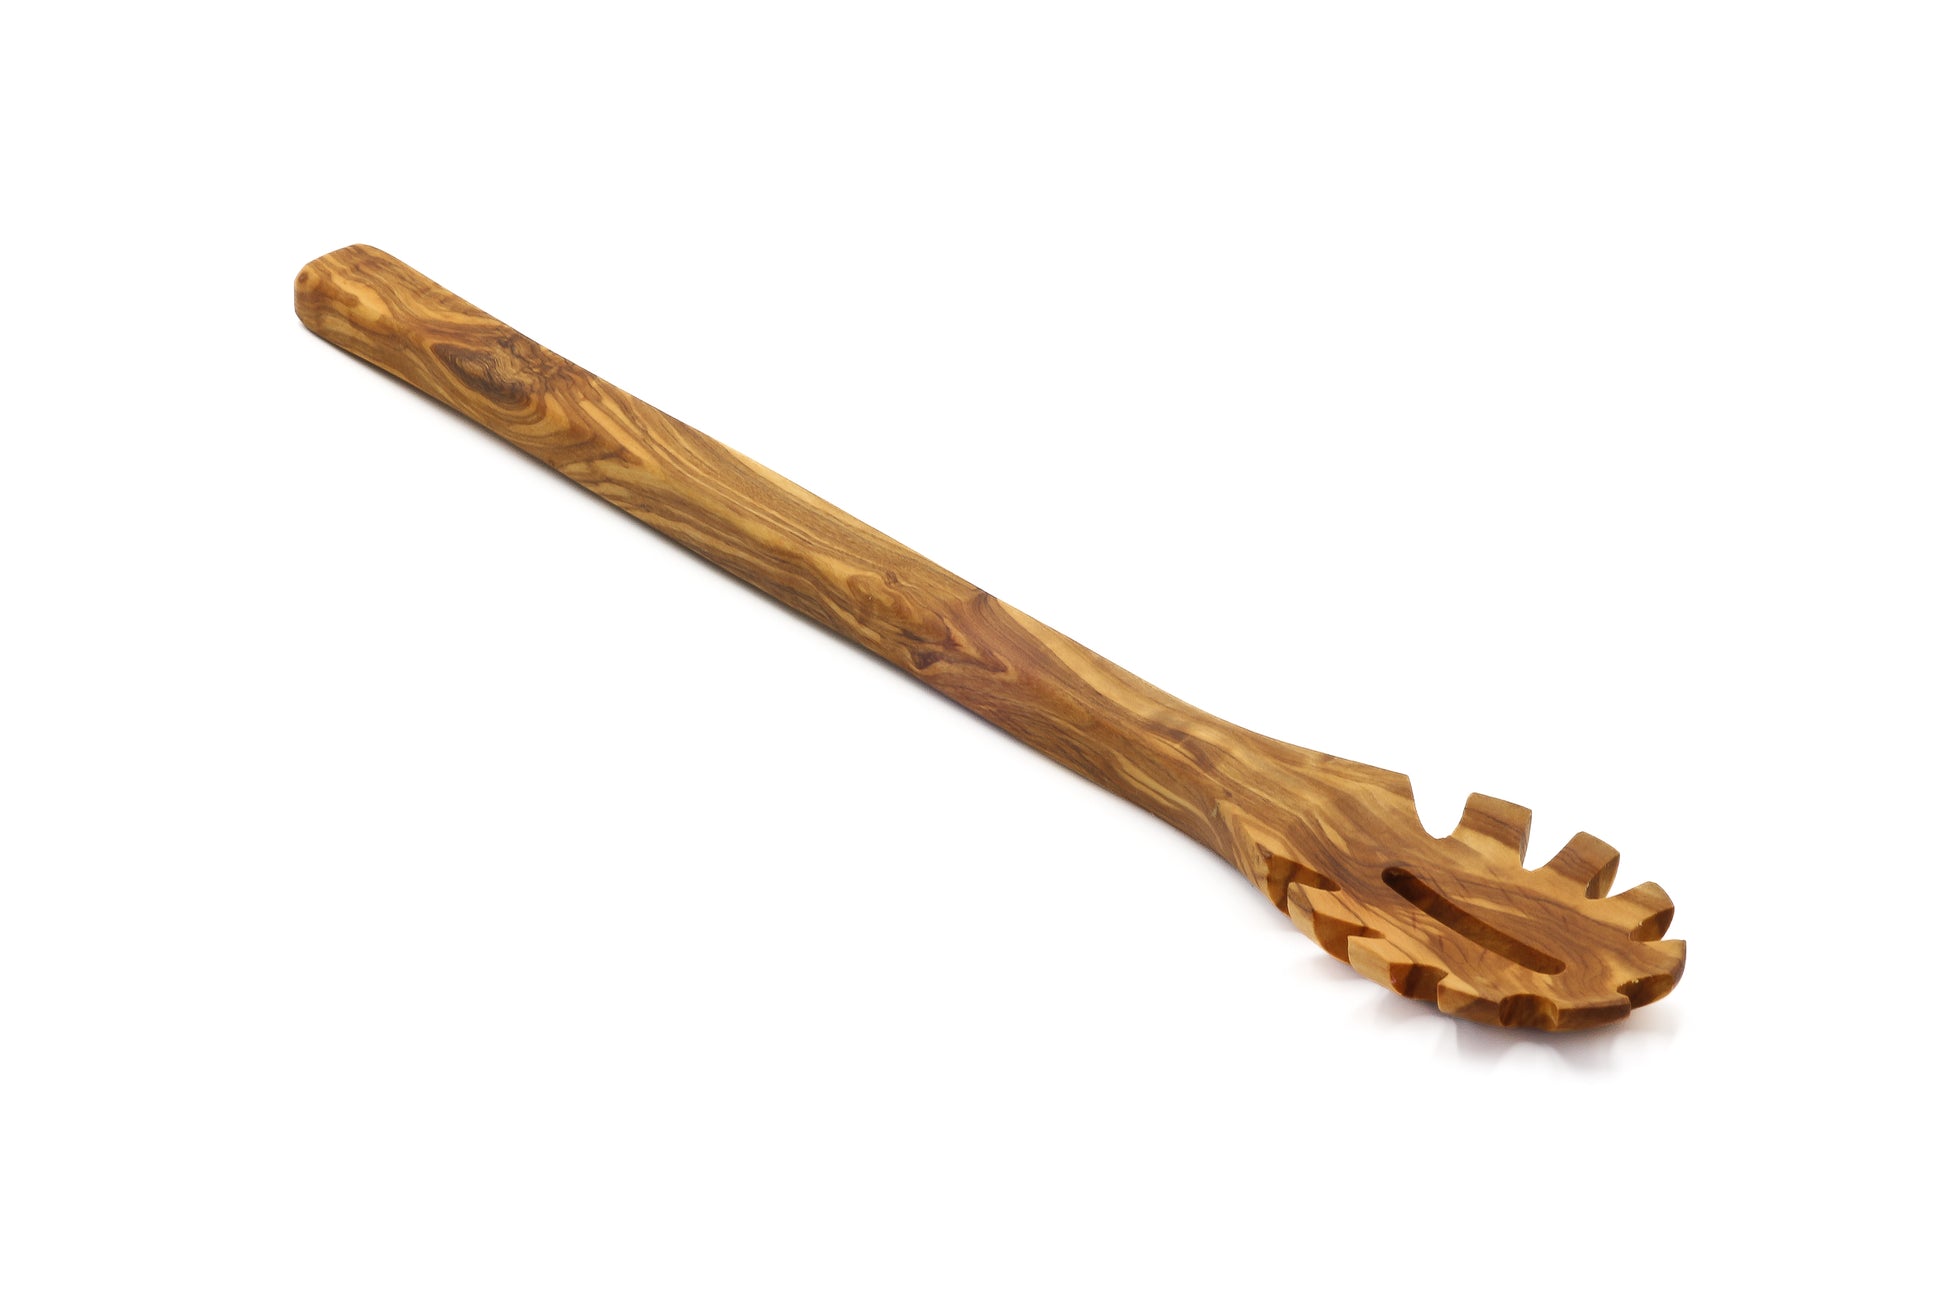 Olive wood hook spoon for serving delicious pasta dishes